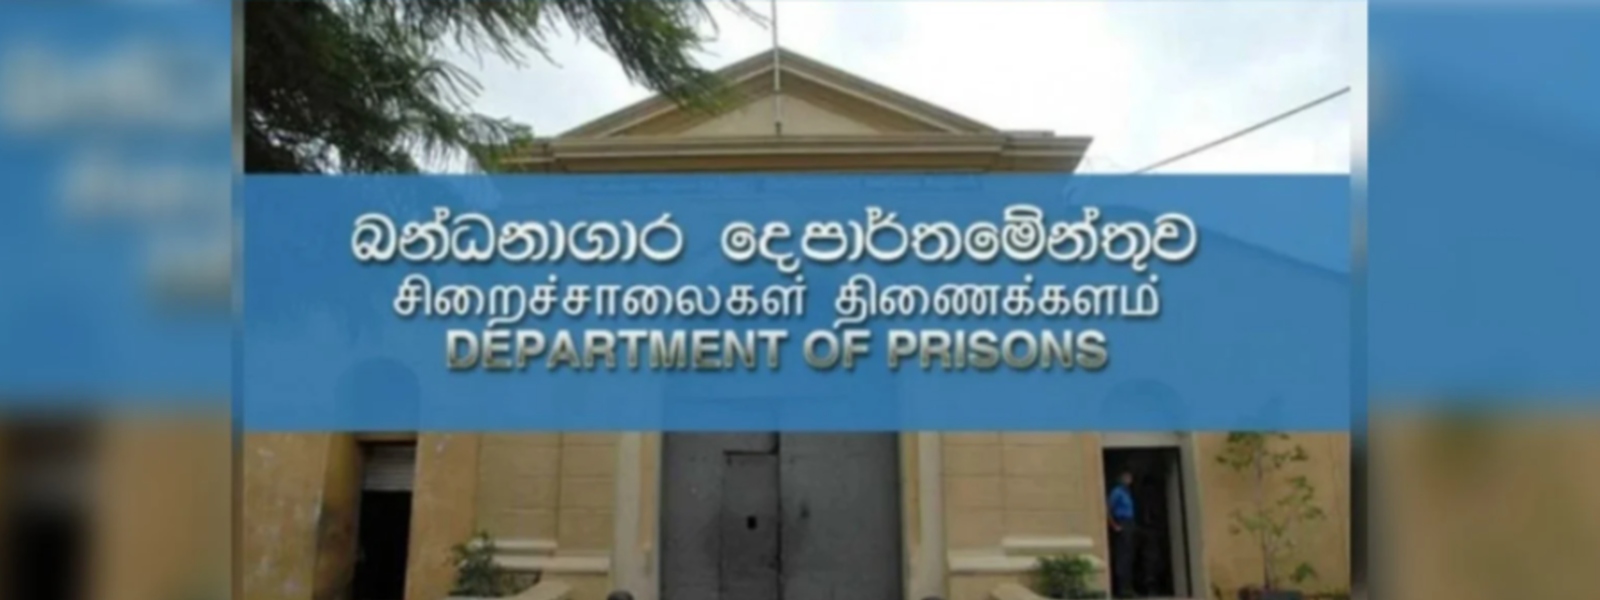 INMATES WHO FAIL TO PAY FINES PARDONED